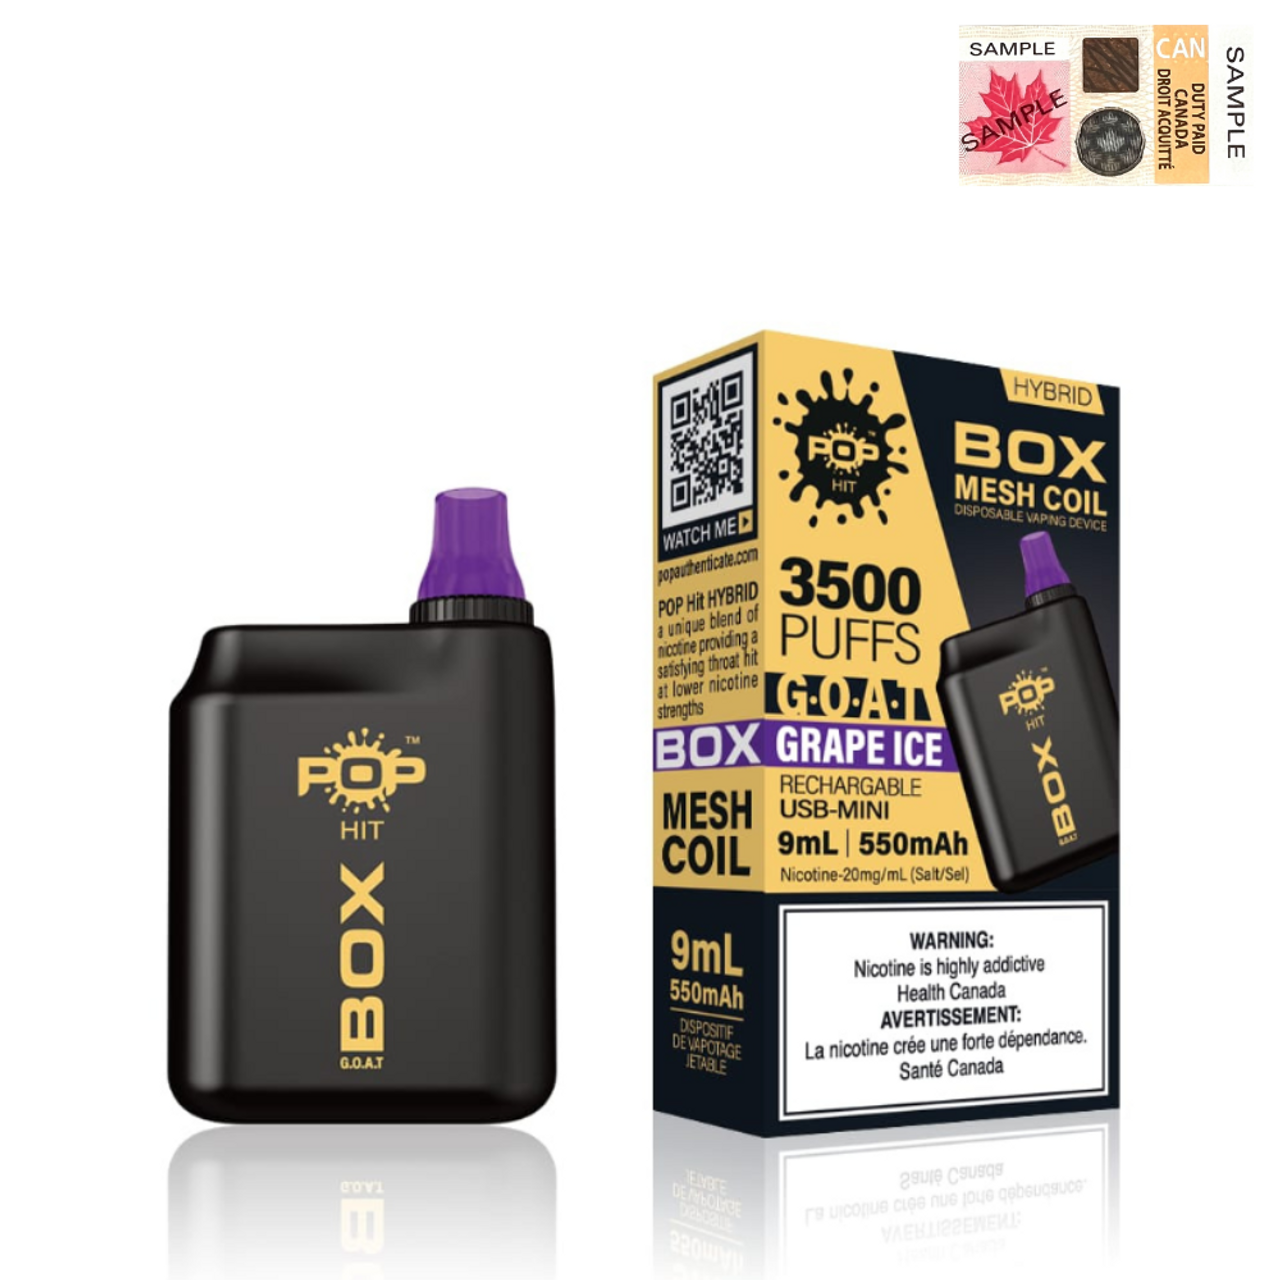 (Stamped) Grape Ice Pop Hybrid Box G.O.A.T 3500 Puffs Disposable Vape Ct-5